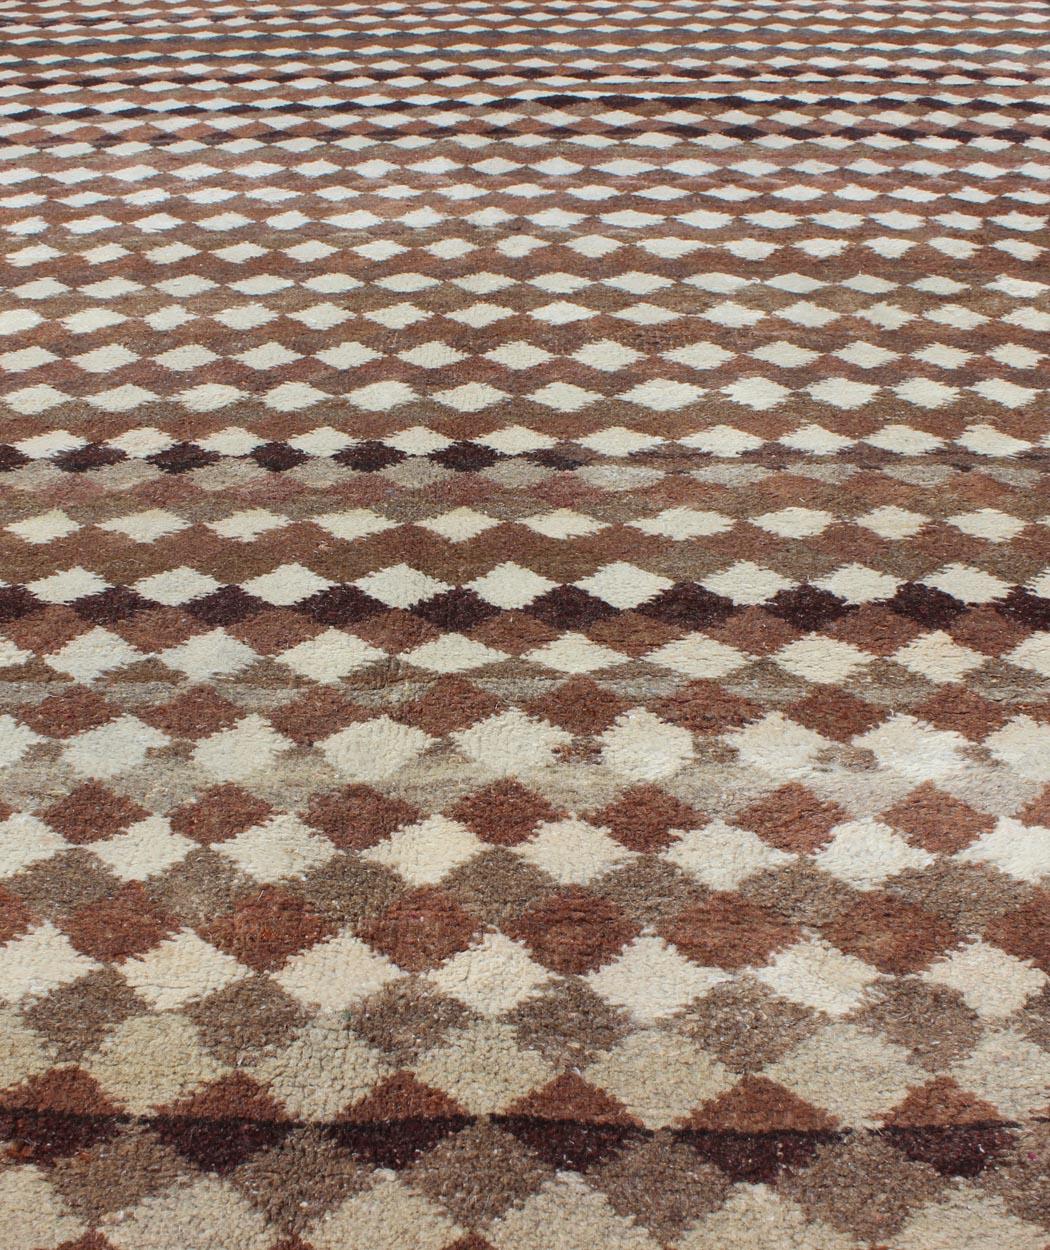 20th Century Mid-Century Modern Rug with All-Over Checkerboard Pattern in Multi Brown Tones For Sale